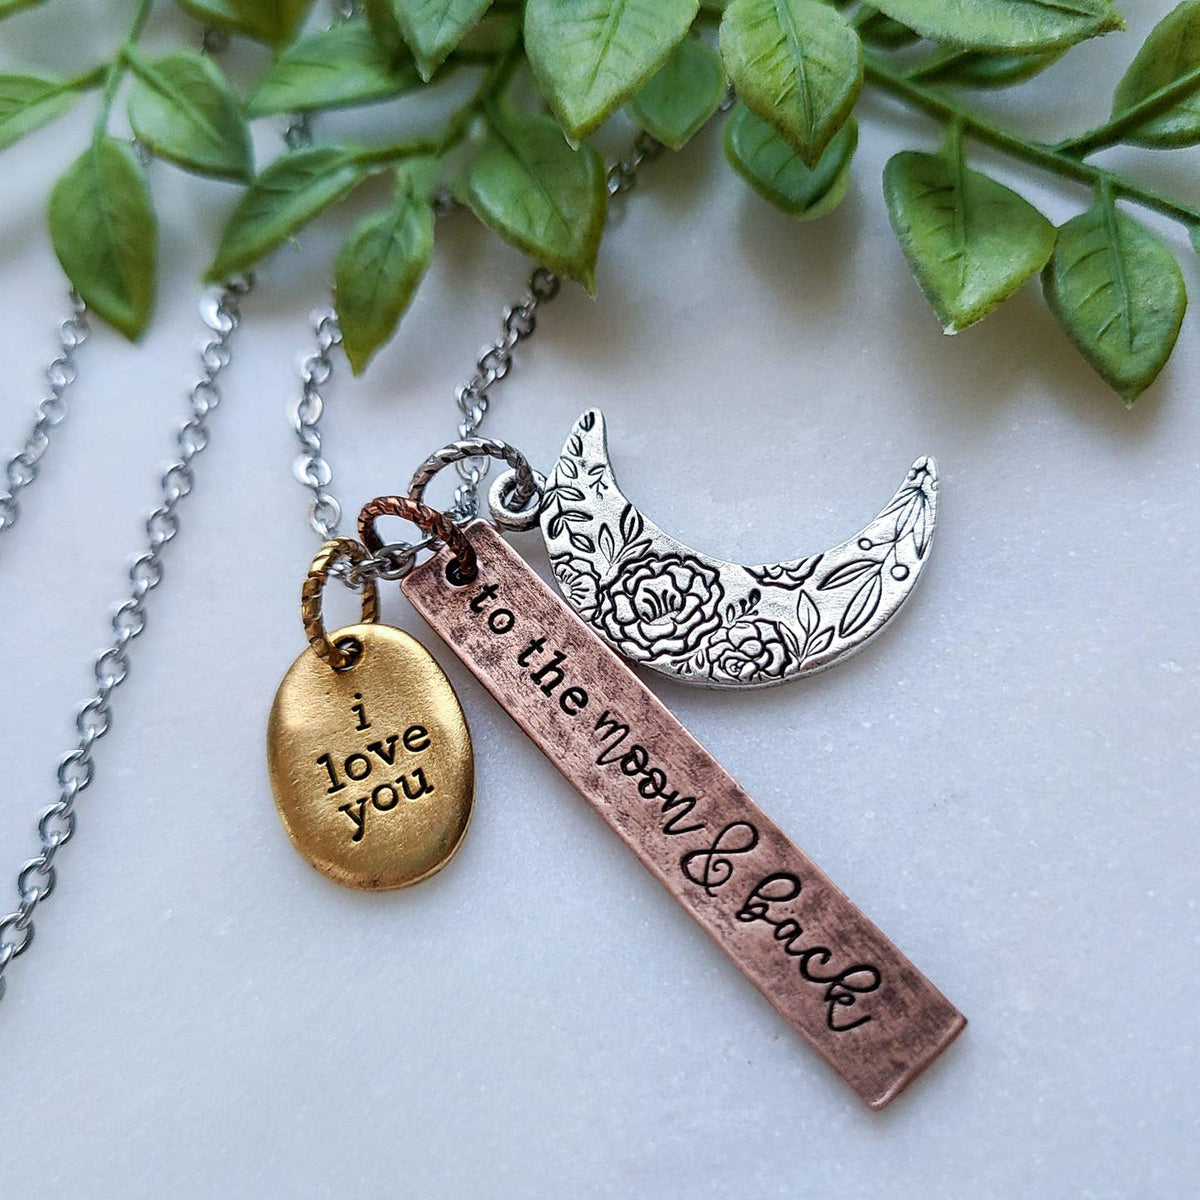 "I Love you to the Moon and Back" stamped necklace